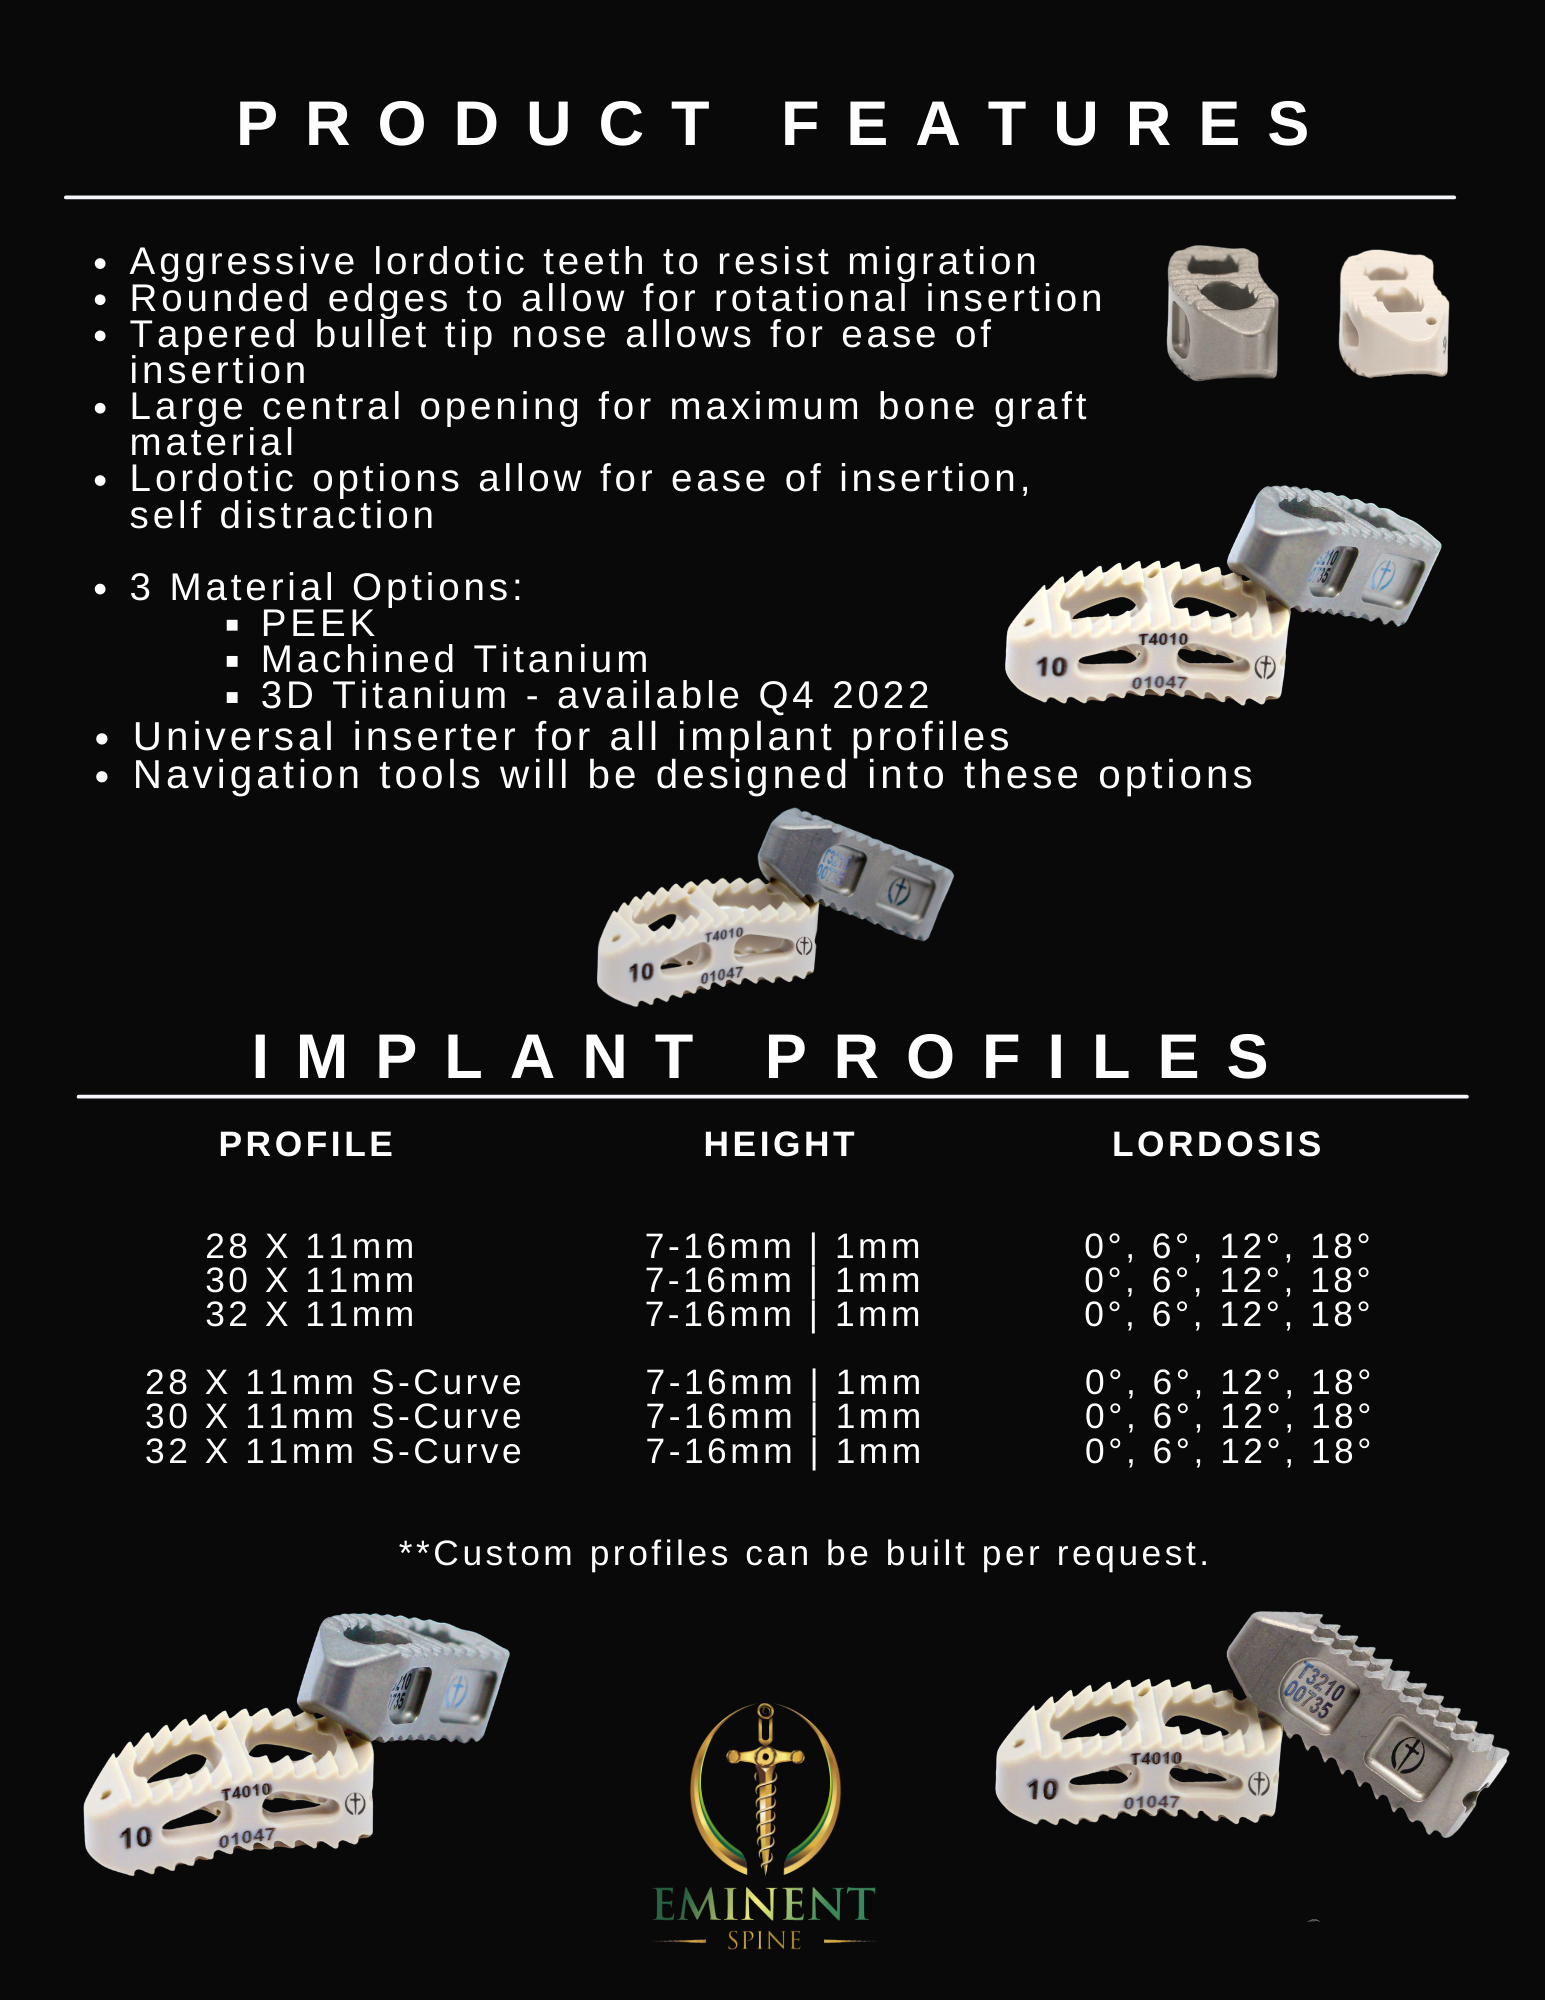 Tranforaminal Lumbar Interbody Fusion Cage made out of peek optima. Has a slight curve in the middle of the implant and aggressive teeth to resist migration.